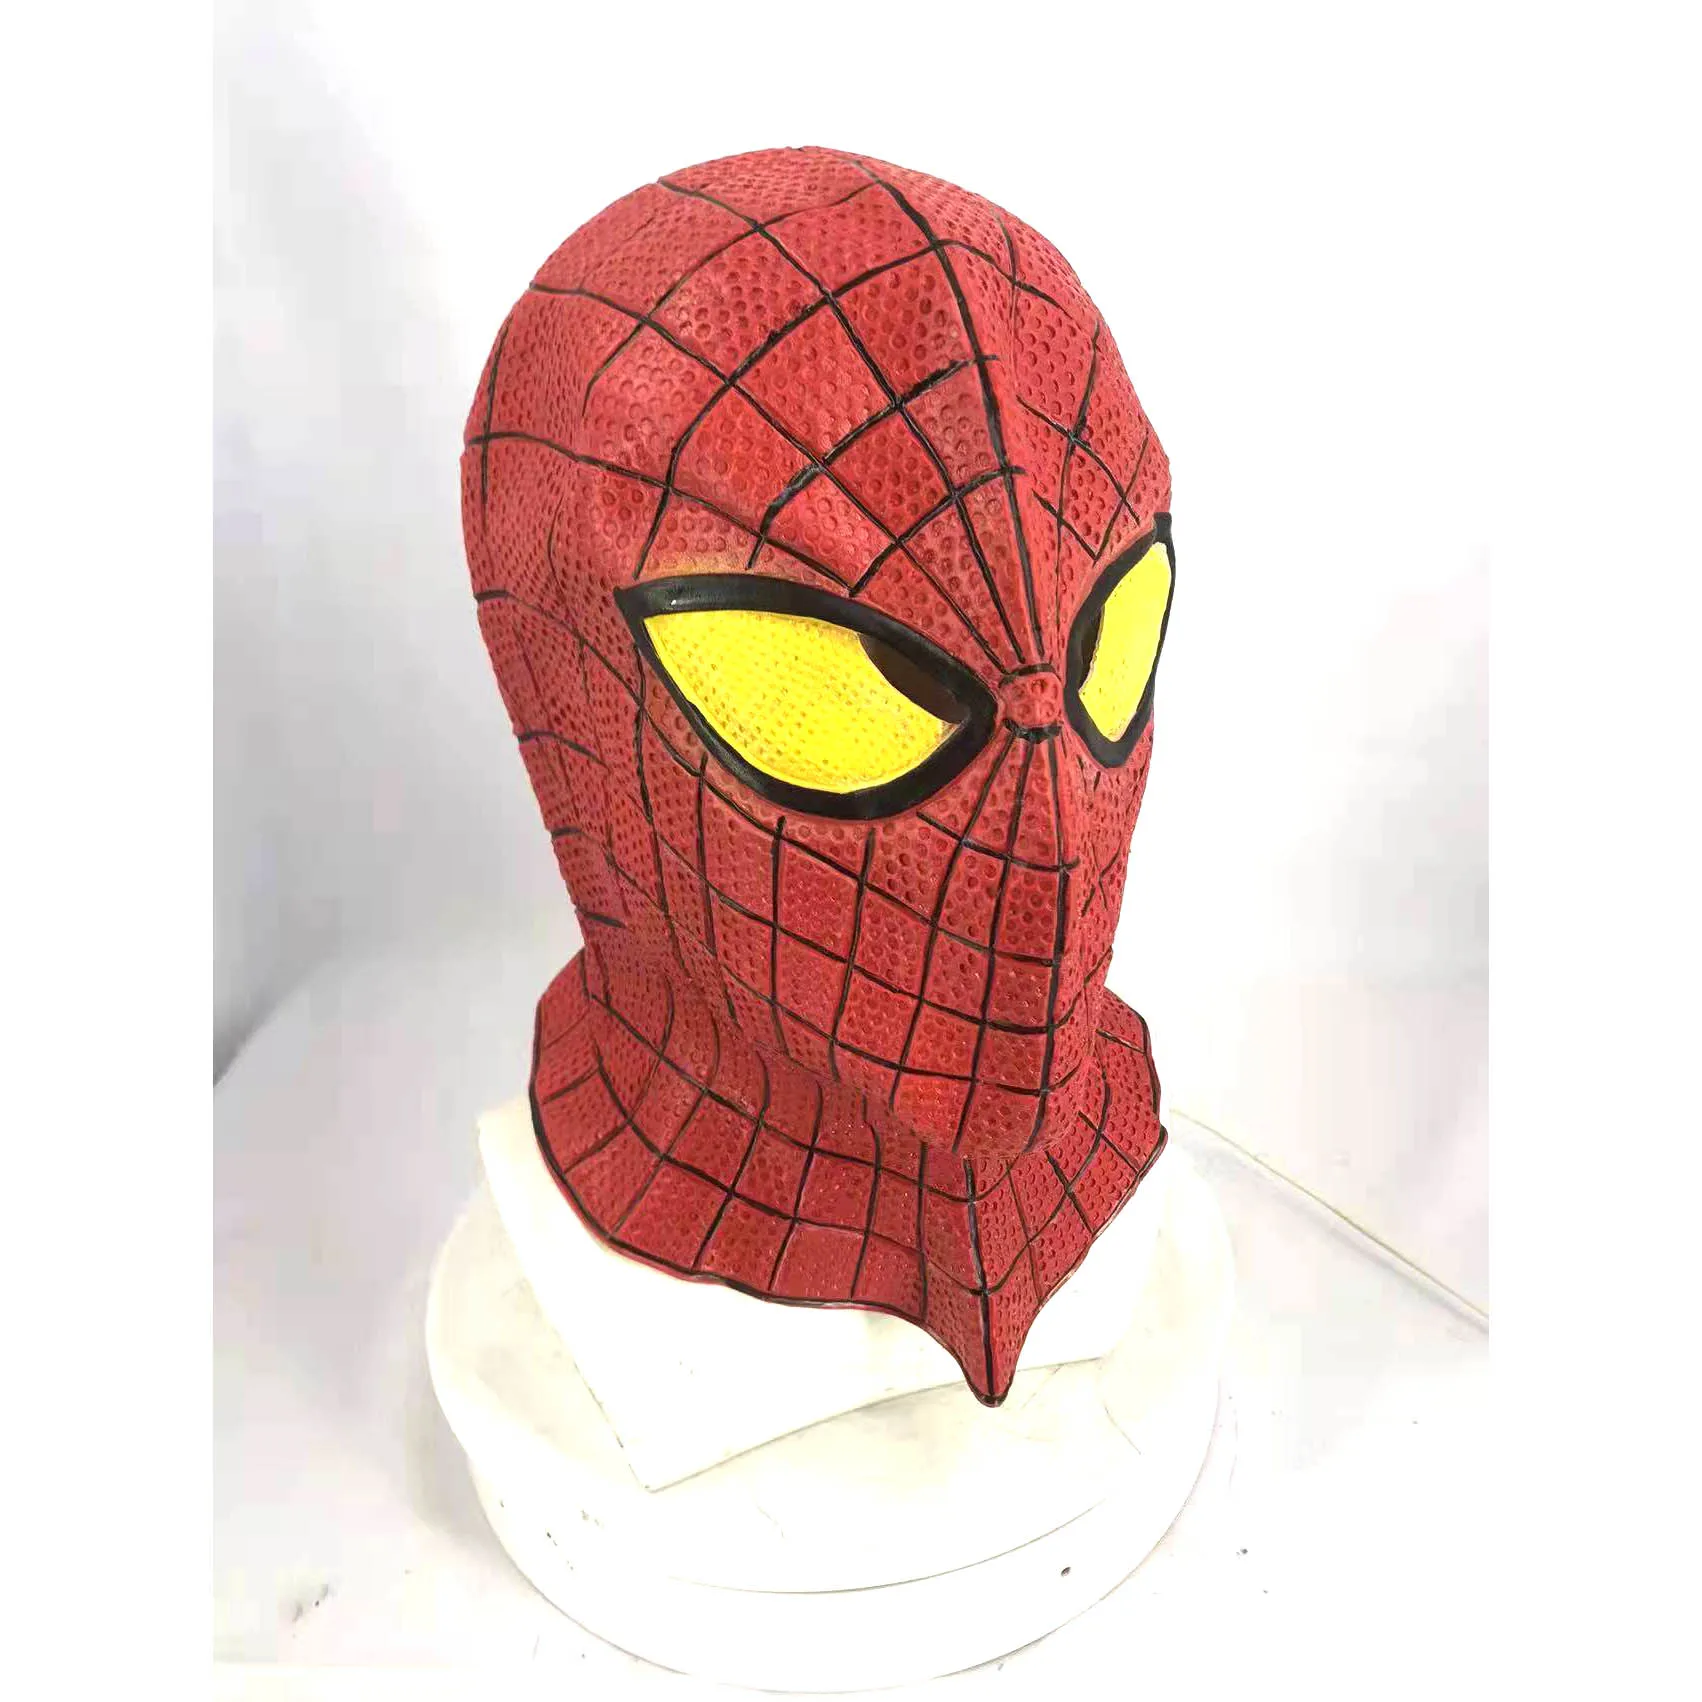 Famous Movie Character Spider Man Rubber Head Costume Party Mask - Buy Spider  Man Mask,Costume Mask,No Way Home Product on 